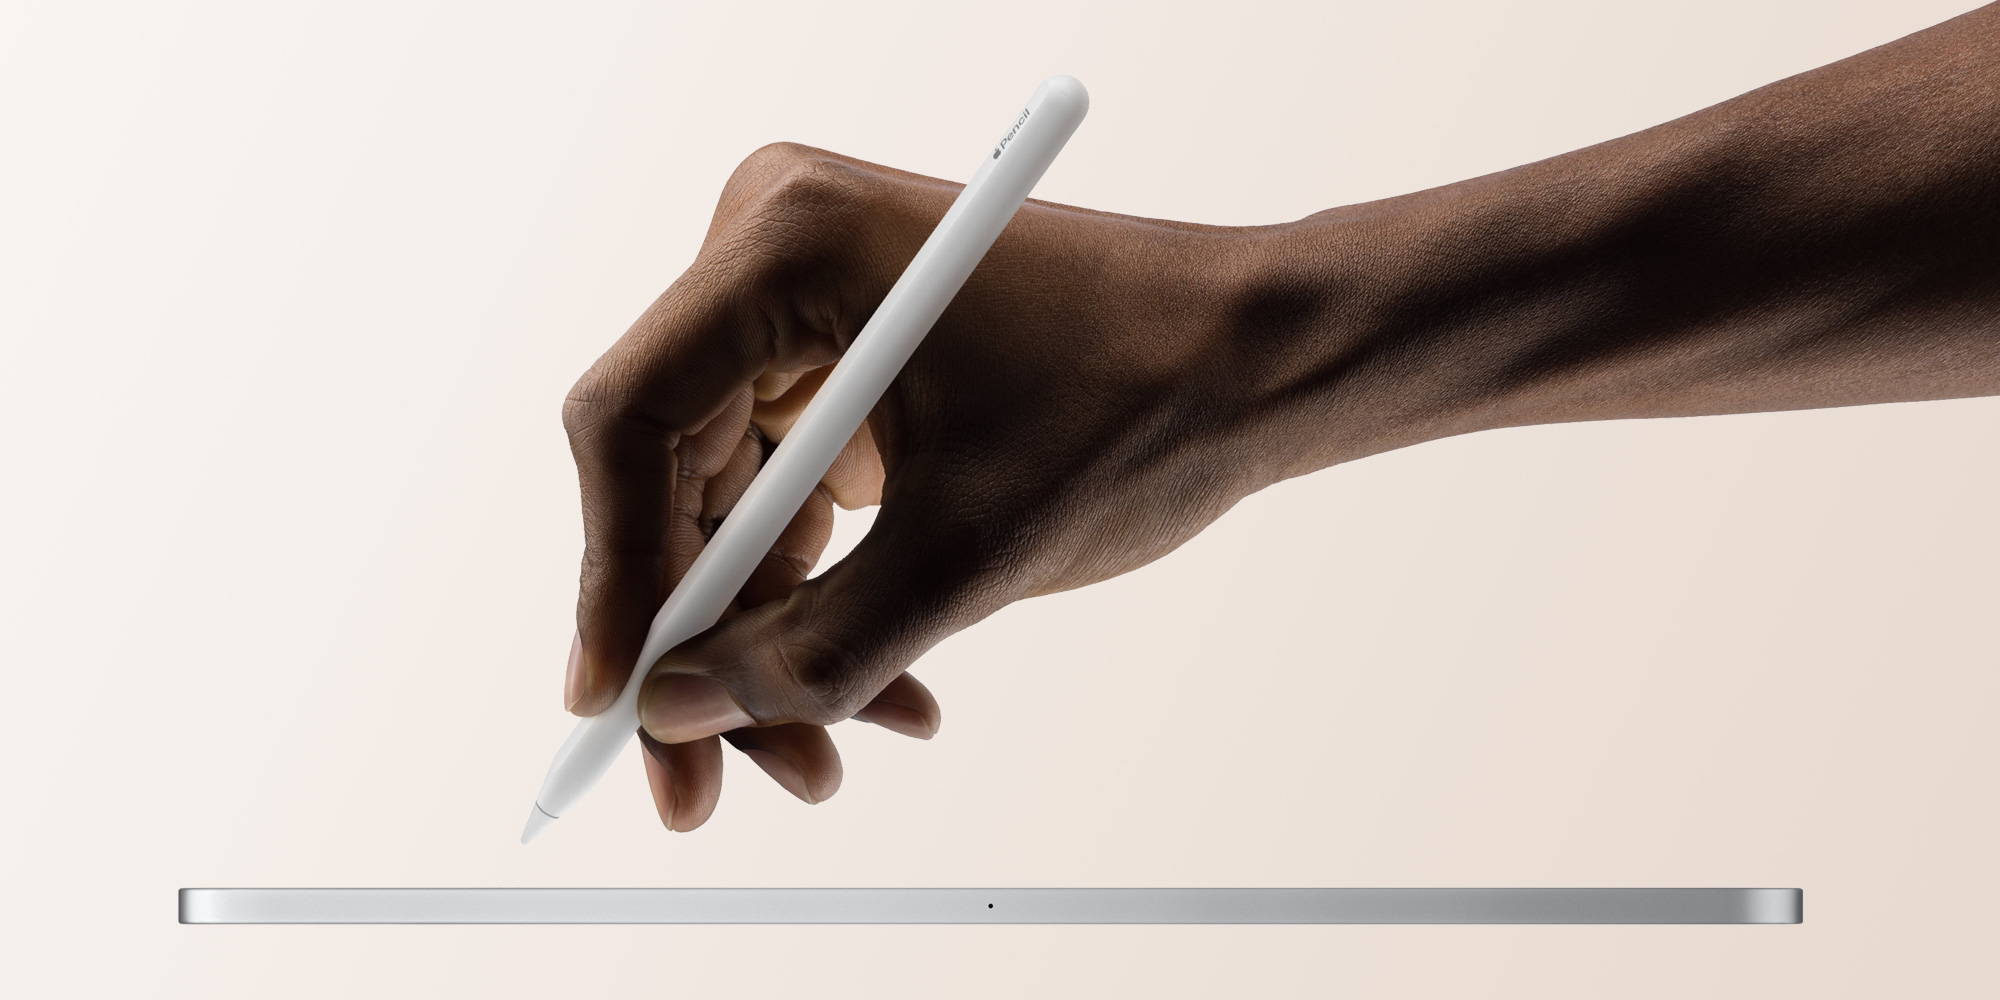 Next-generation Apple Pencil might have interchangeable magnetic tips